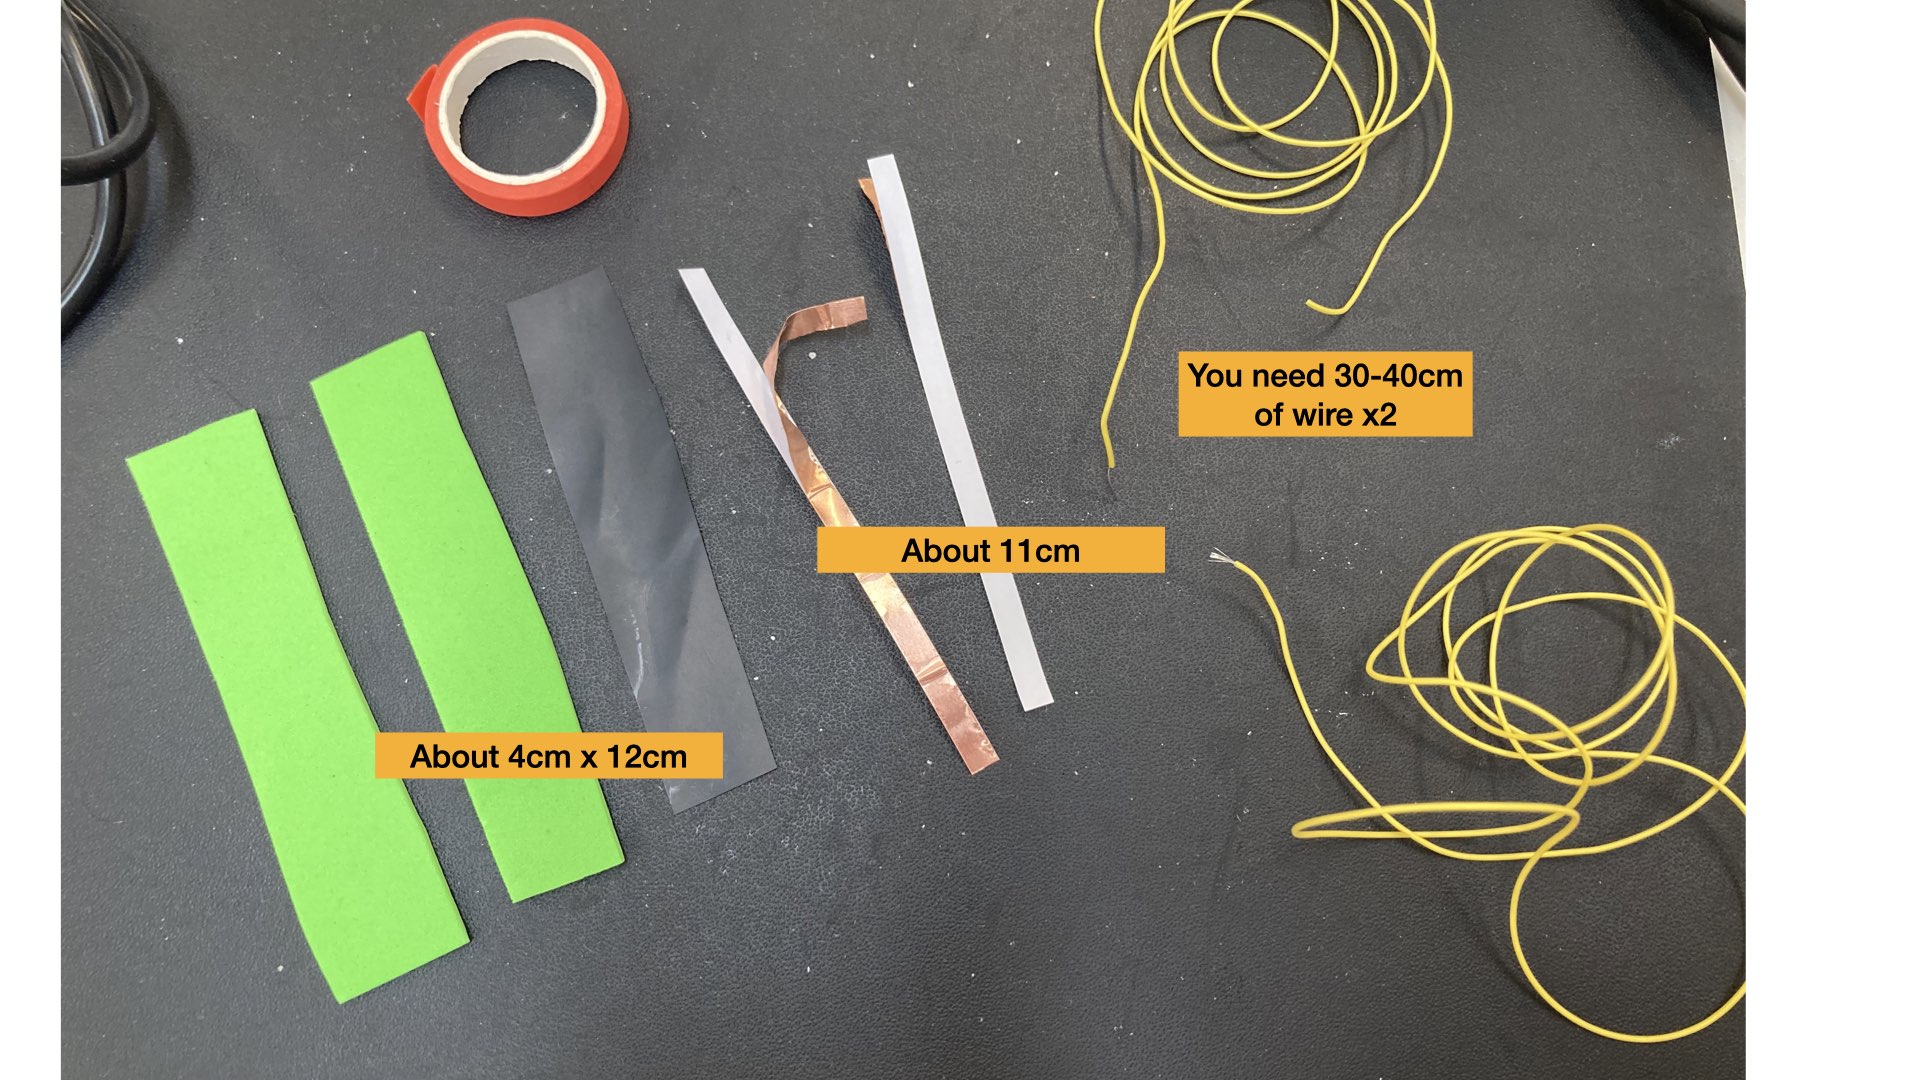 Image of Tape, Foam, Copper tape, Silicon Wire and velostat showing wire should be 30-40 centimeters in length (and you need 2) copper tape should be about 11cm and foam & velostat should be about 4cm by 12cm